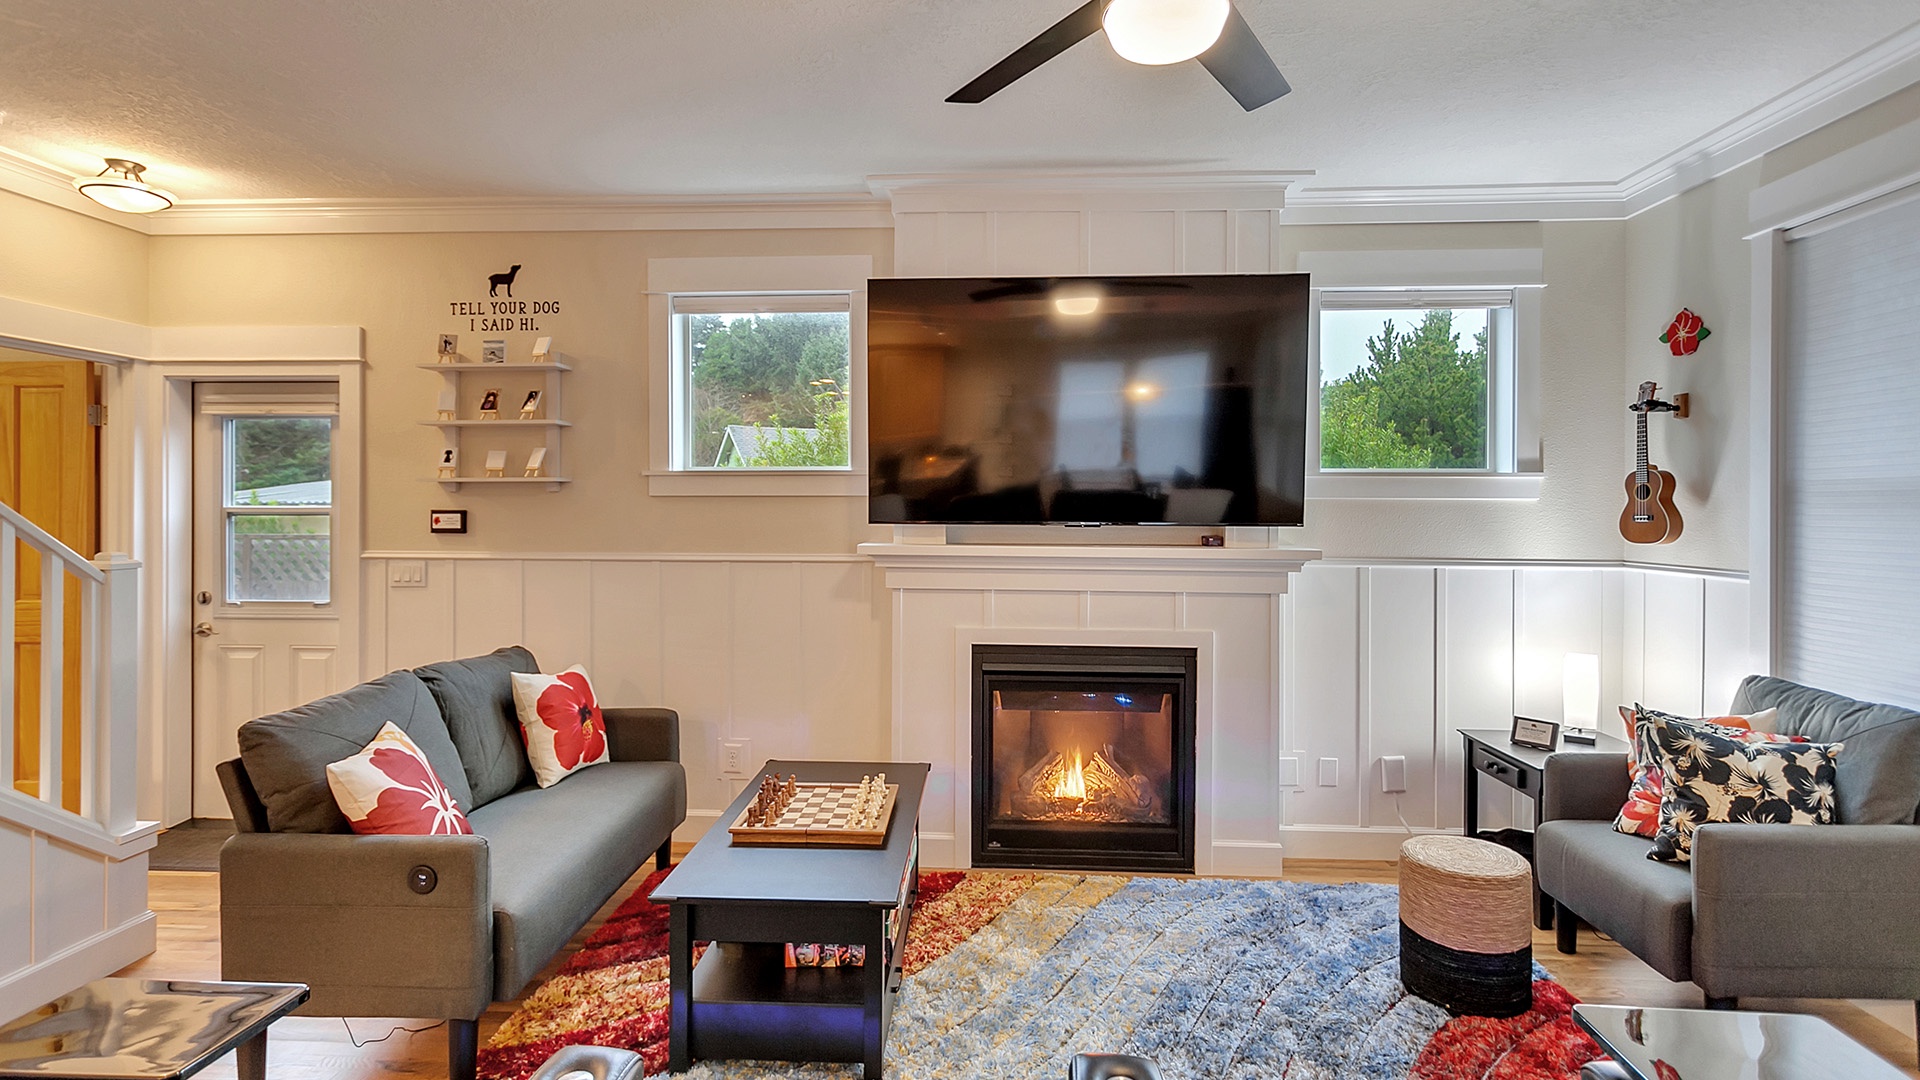 Lincoln City Vacation Rentals, Ohana Beach Park - Gather around and enjoy a movie night with your group